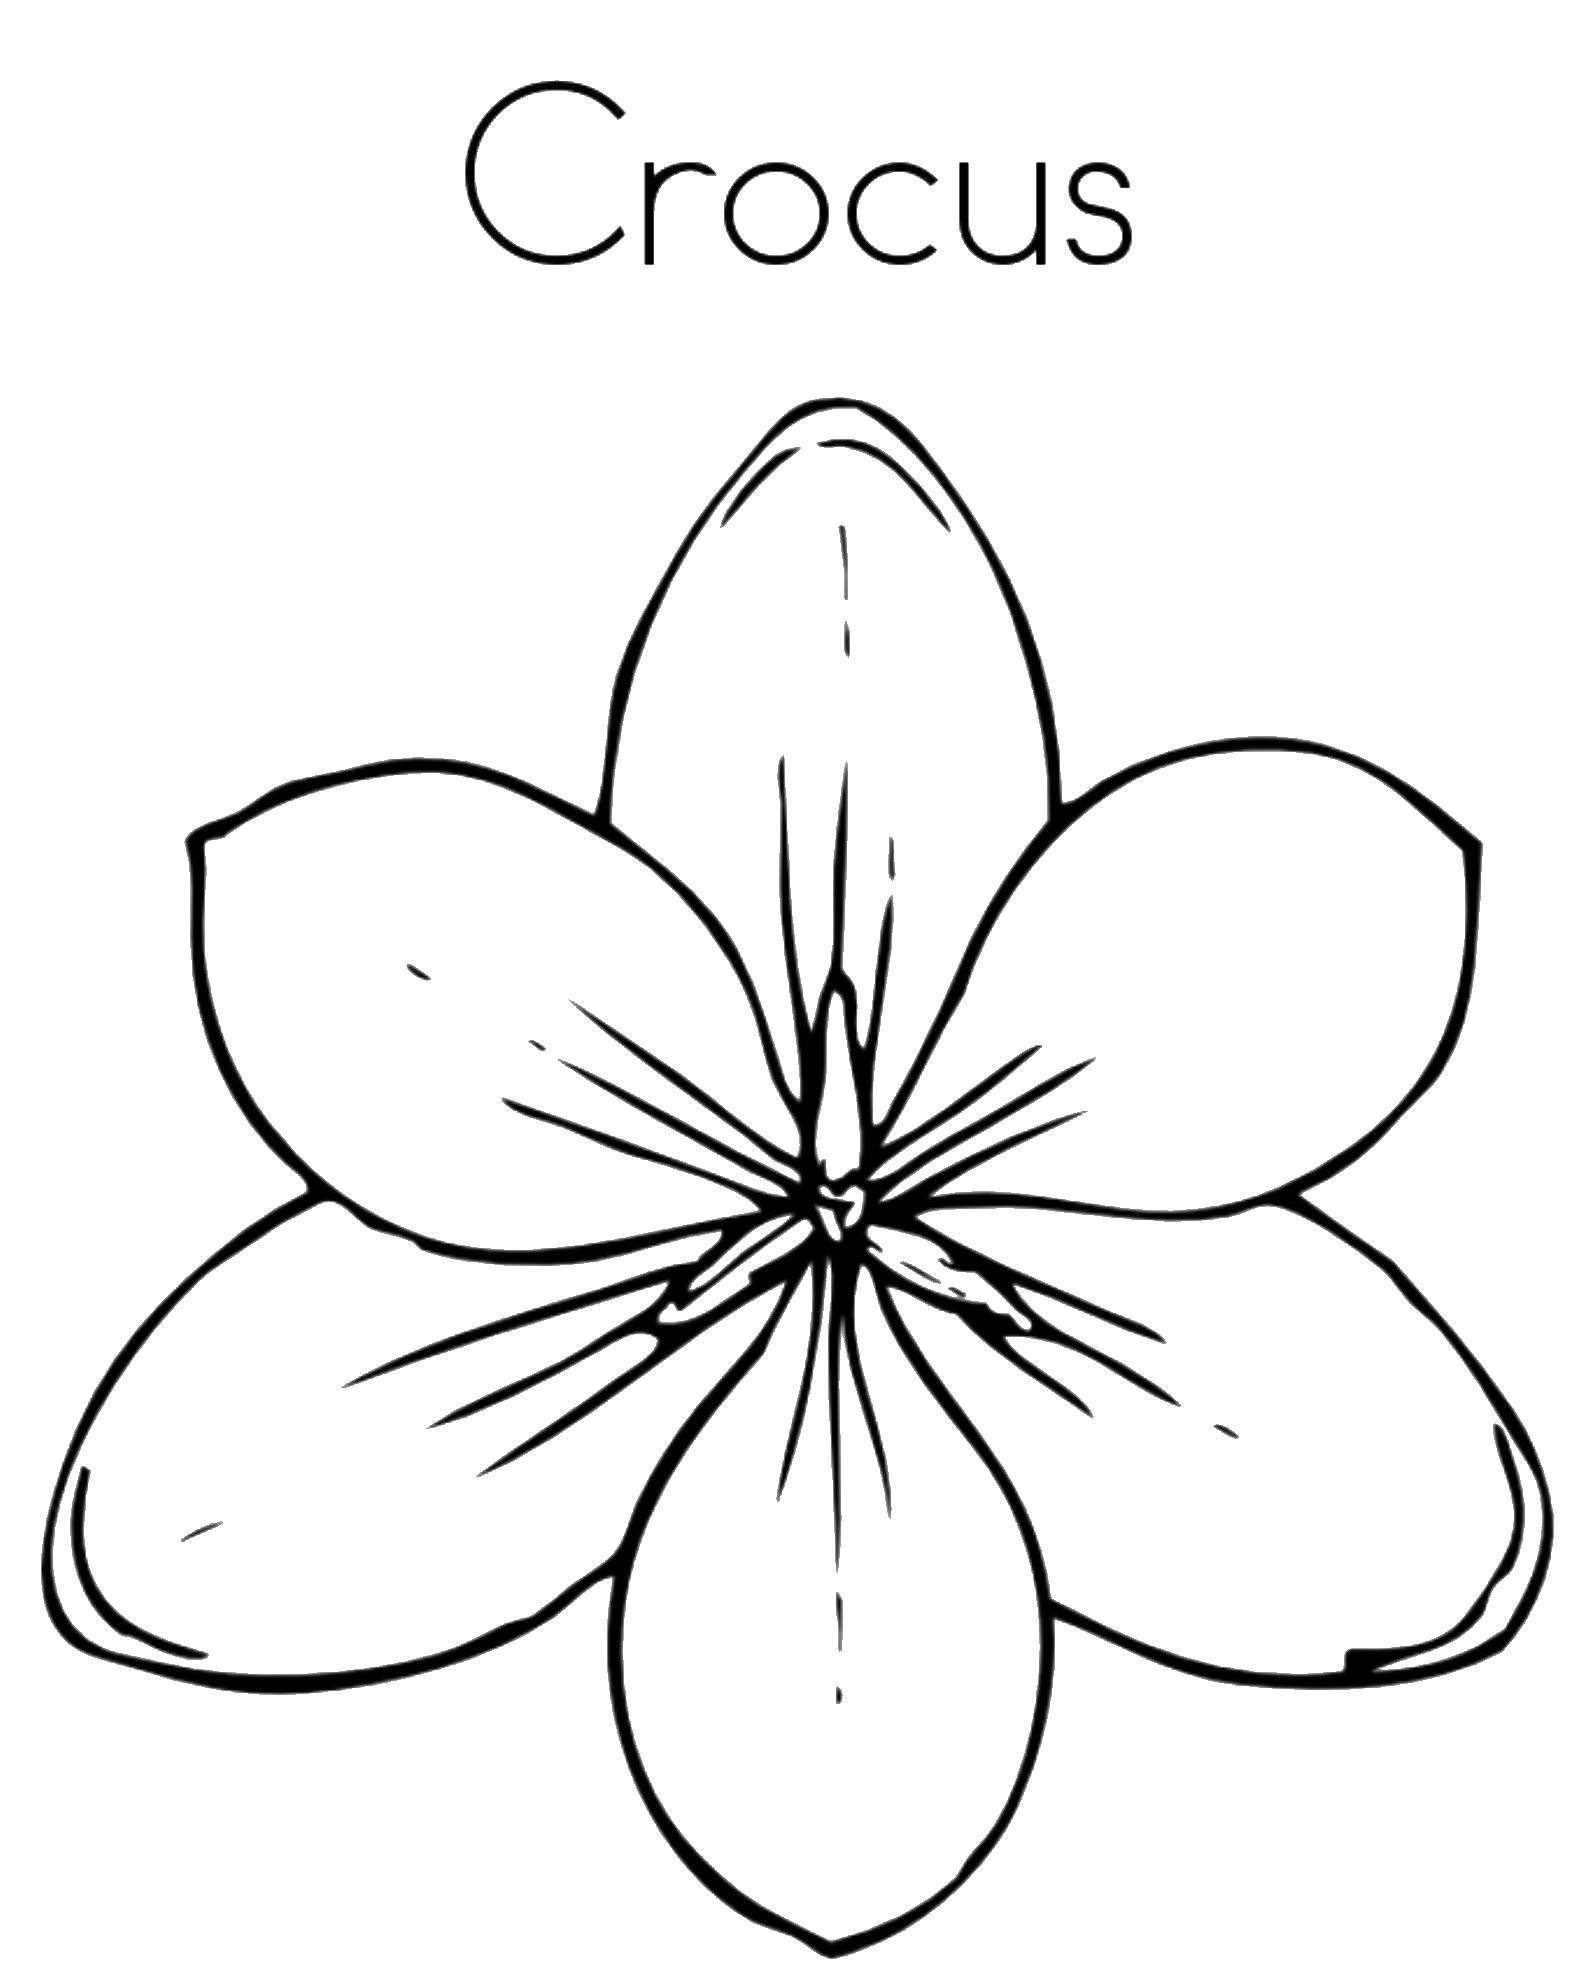 Coloring Flowers. Category English. Tags:  English.